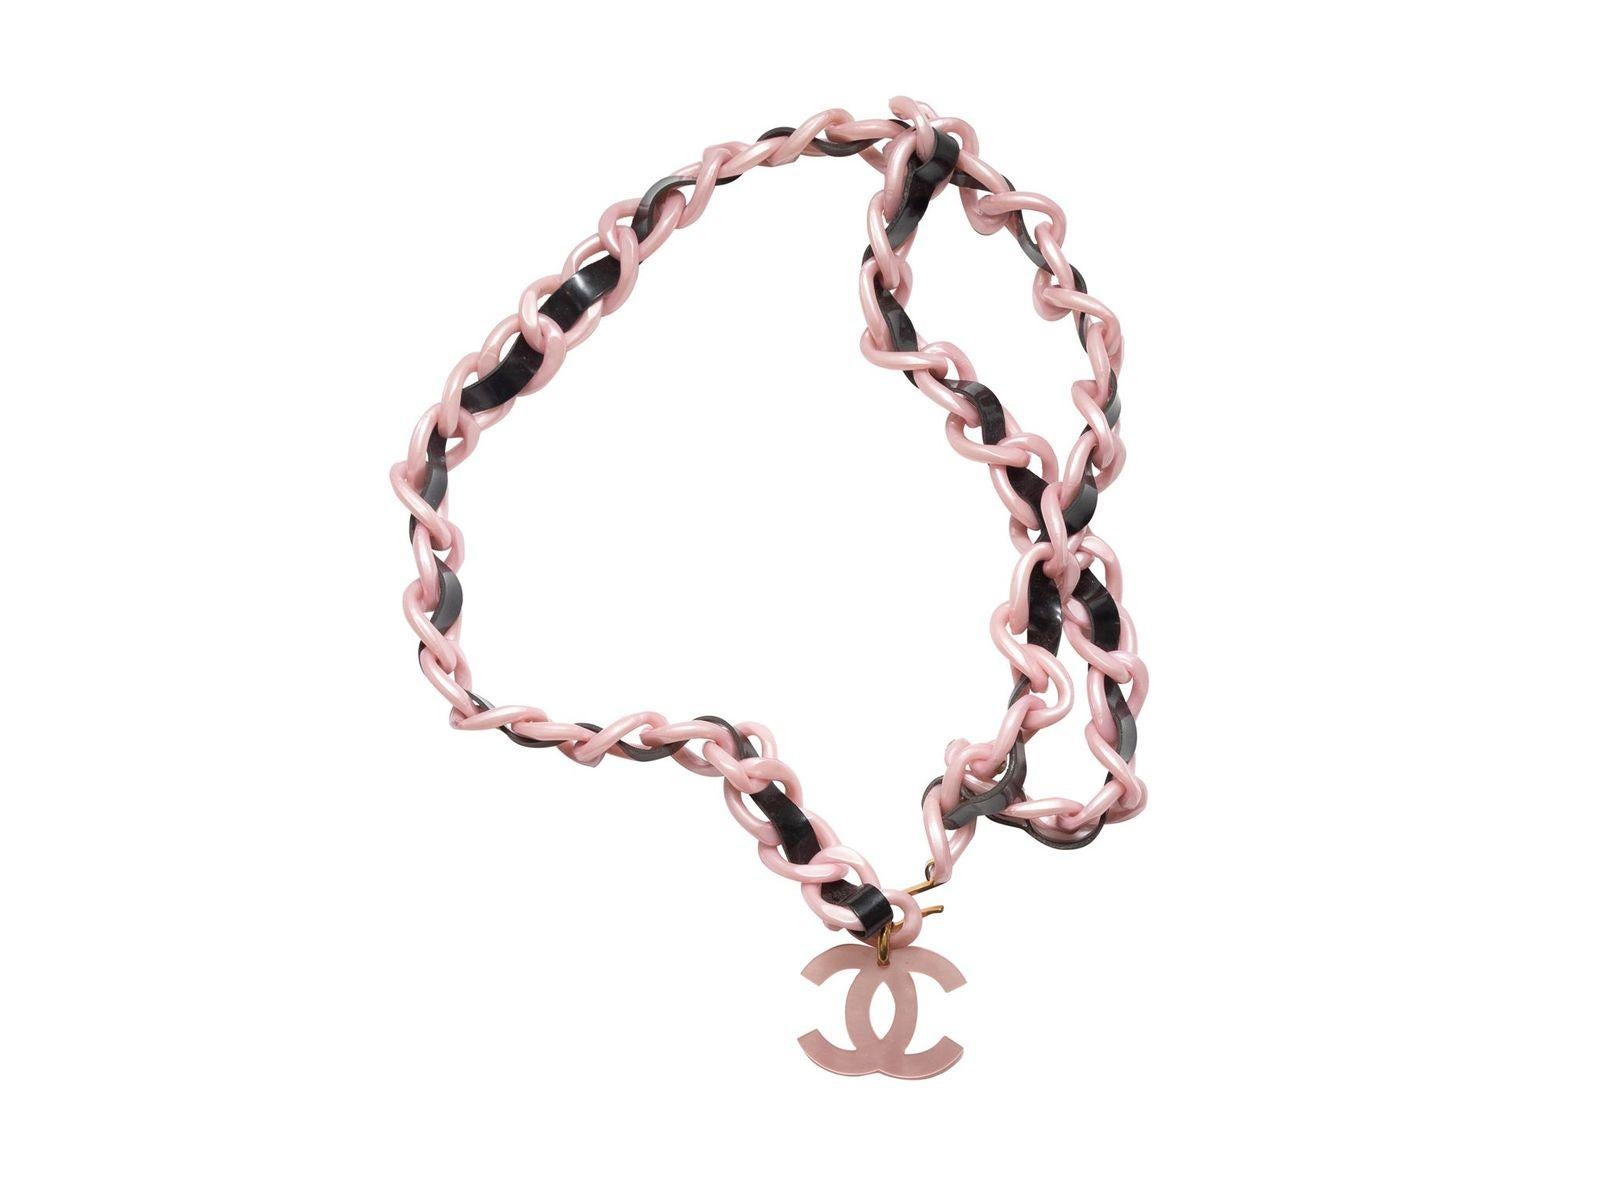 Product Details: Vintage pink and black acrylic chain belt by Chanel. Circa 1994. CC logo charm at end. 0.5